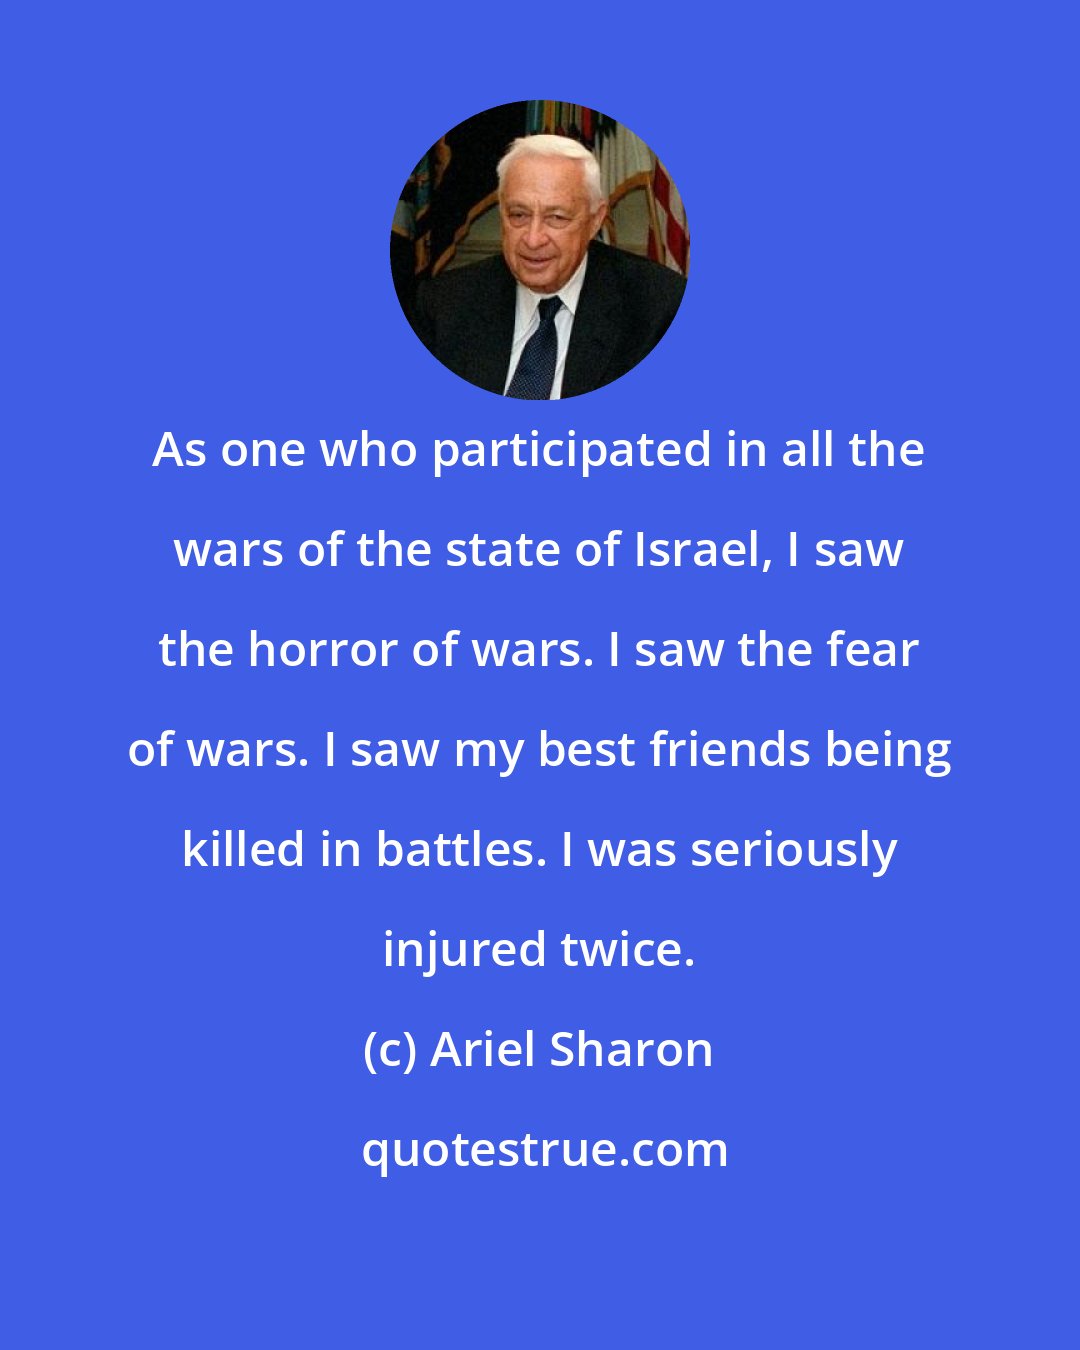 Ariel Sharon: As one who participated in all the wars of the state of Israel, I saw the horror of wars. I saw the fear of wars. I saw my best friends being killed in battles. I was seriously injured twice.